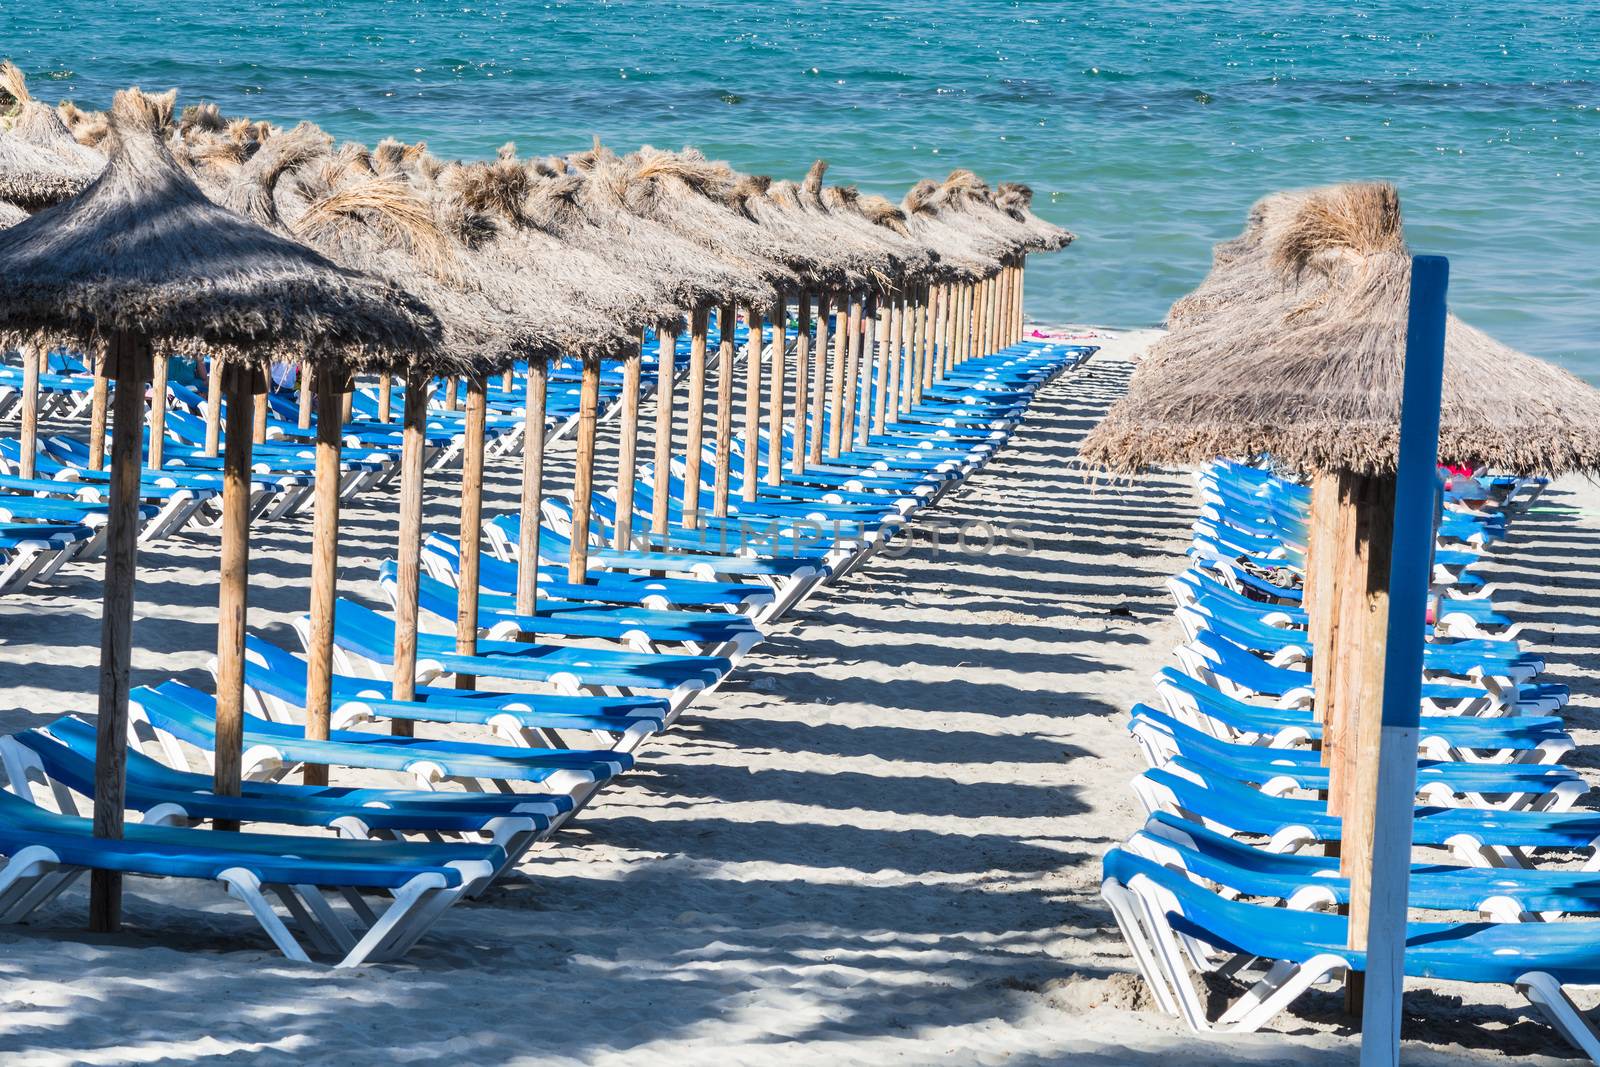 Deckchairs and umbrellas in a row        by JFsPic